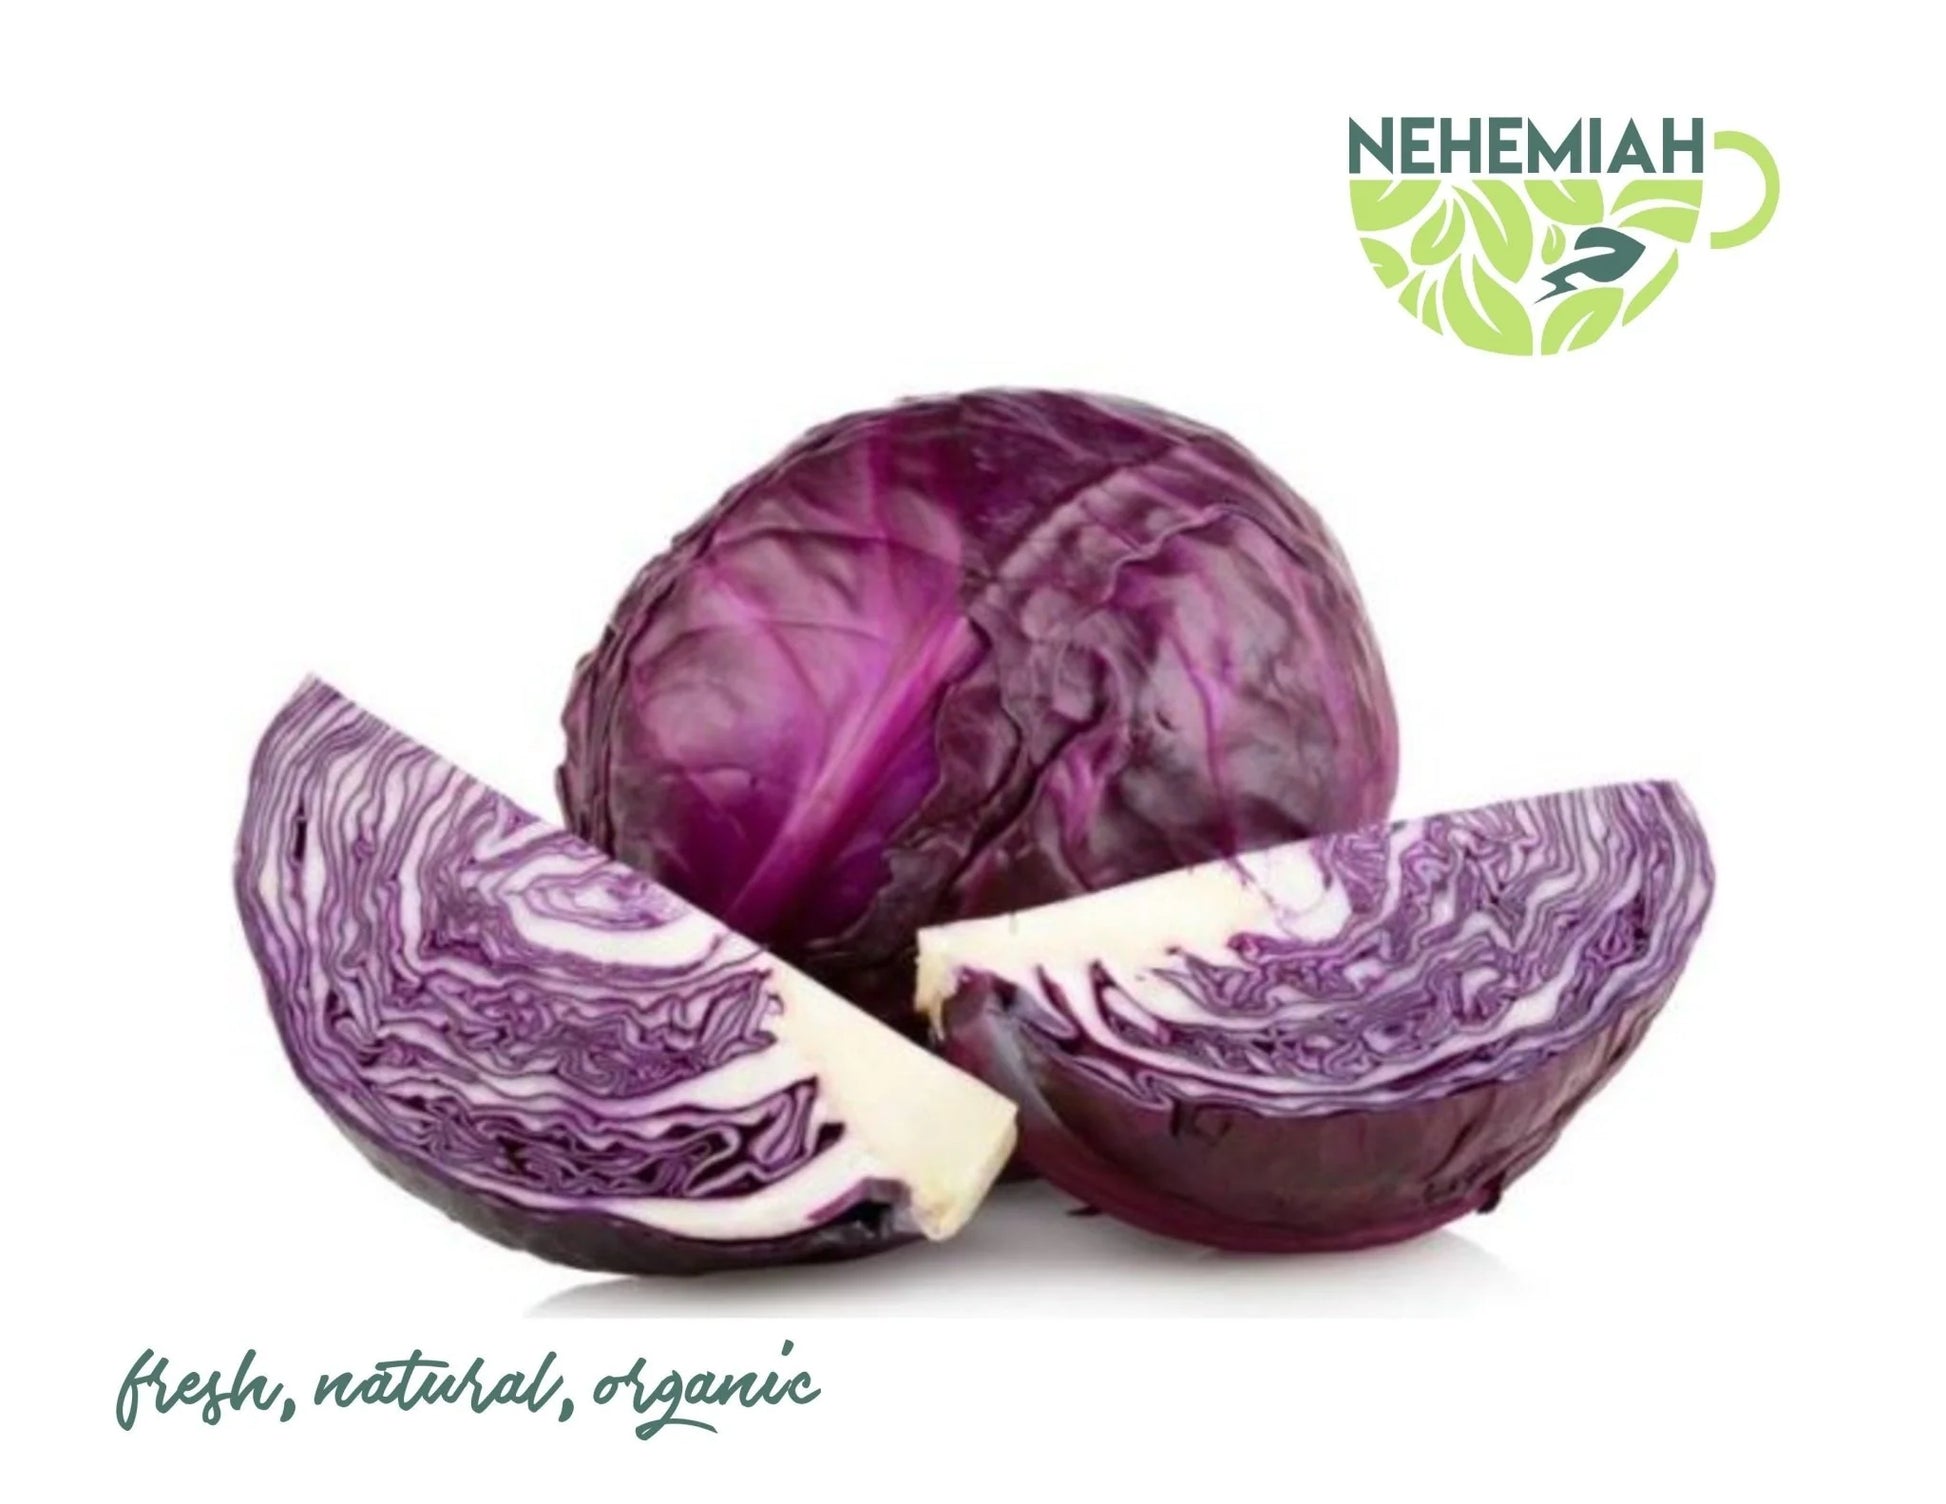 Nehemiah Superfood Red Cabbage